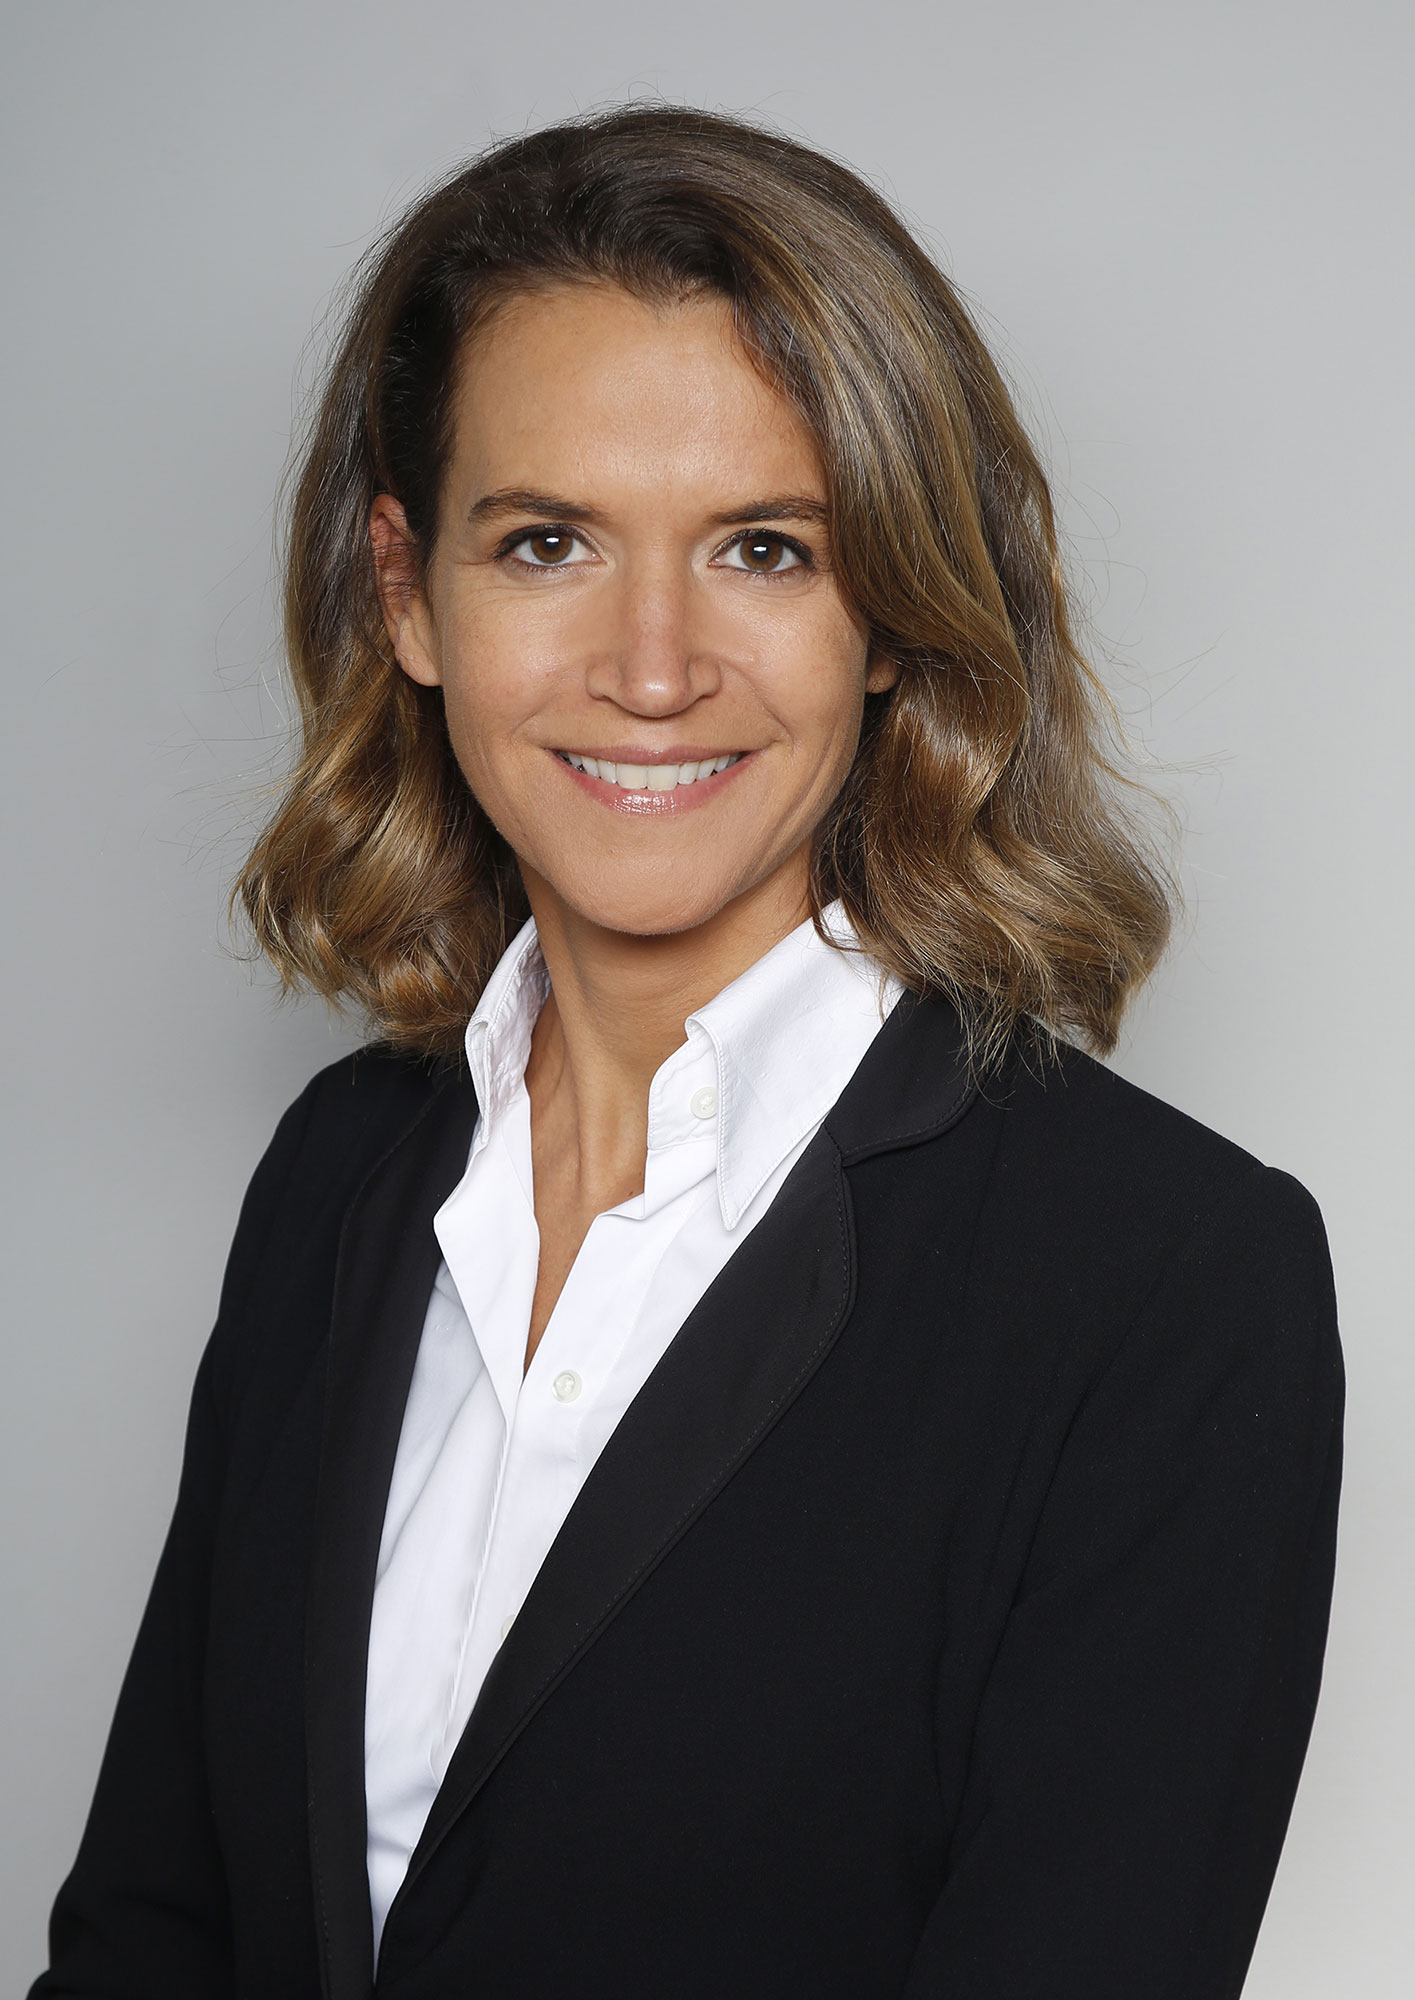 Mathilde Rodie Financial Communications Director of SUEZ Group